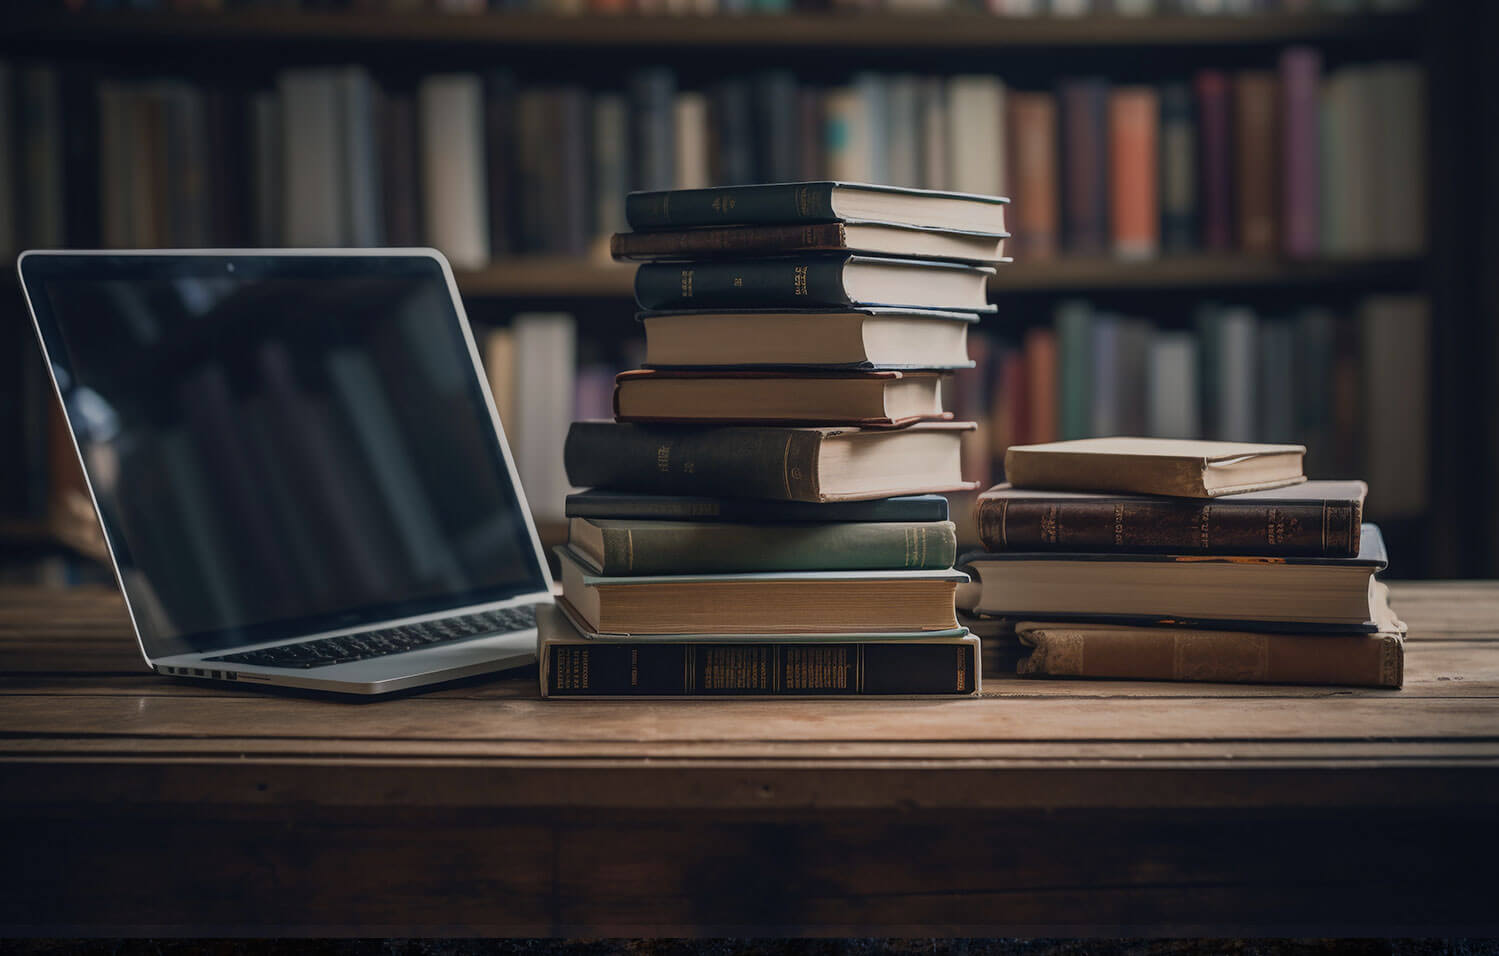 A pile of old library books sits next to an open laptop